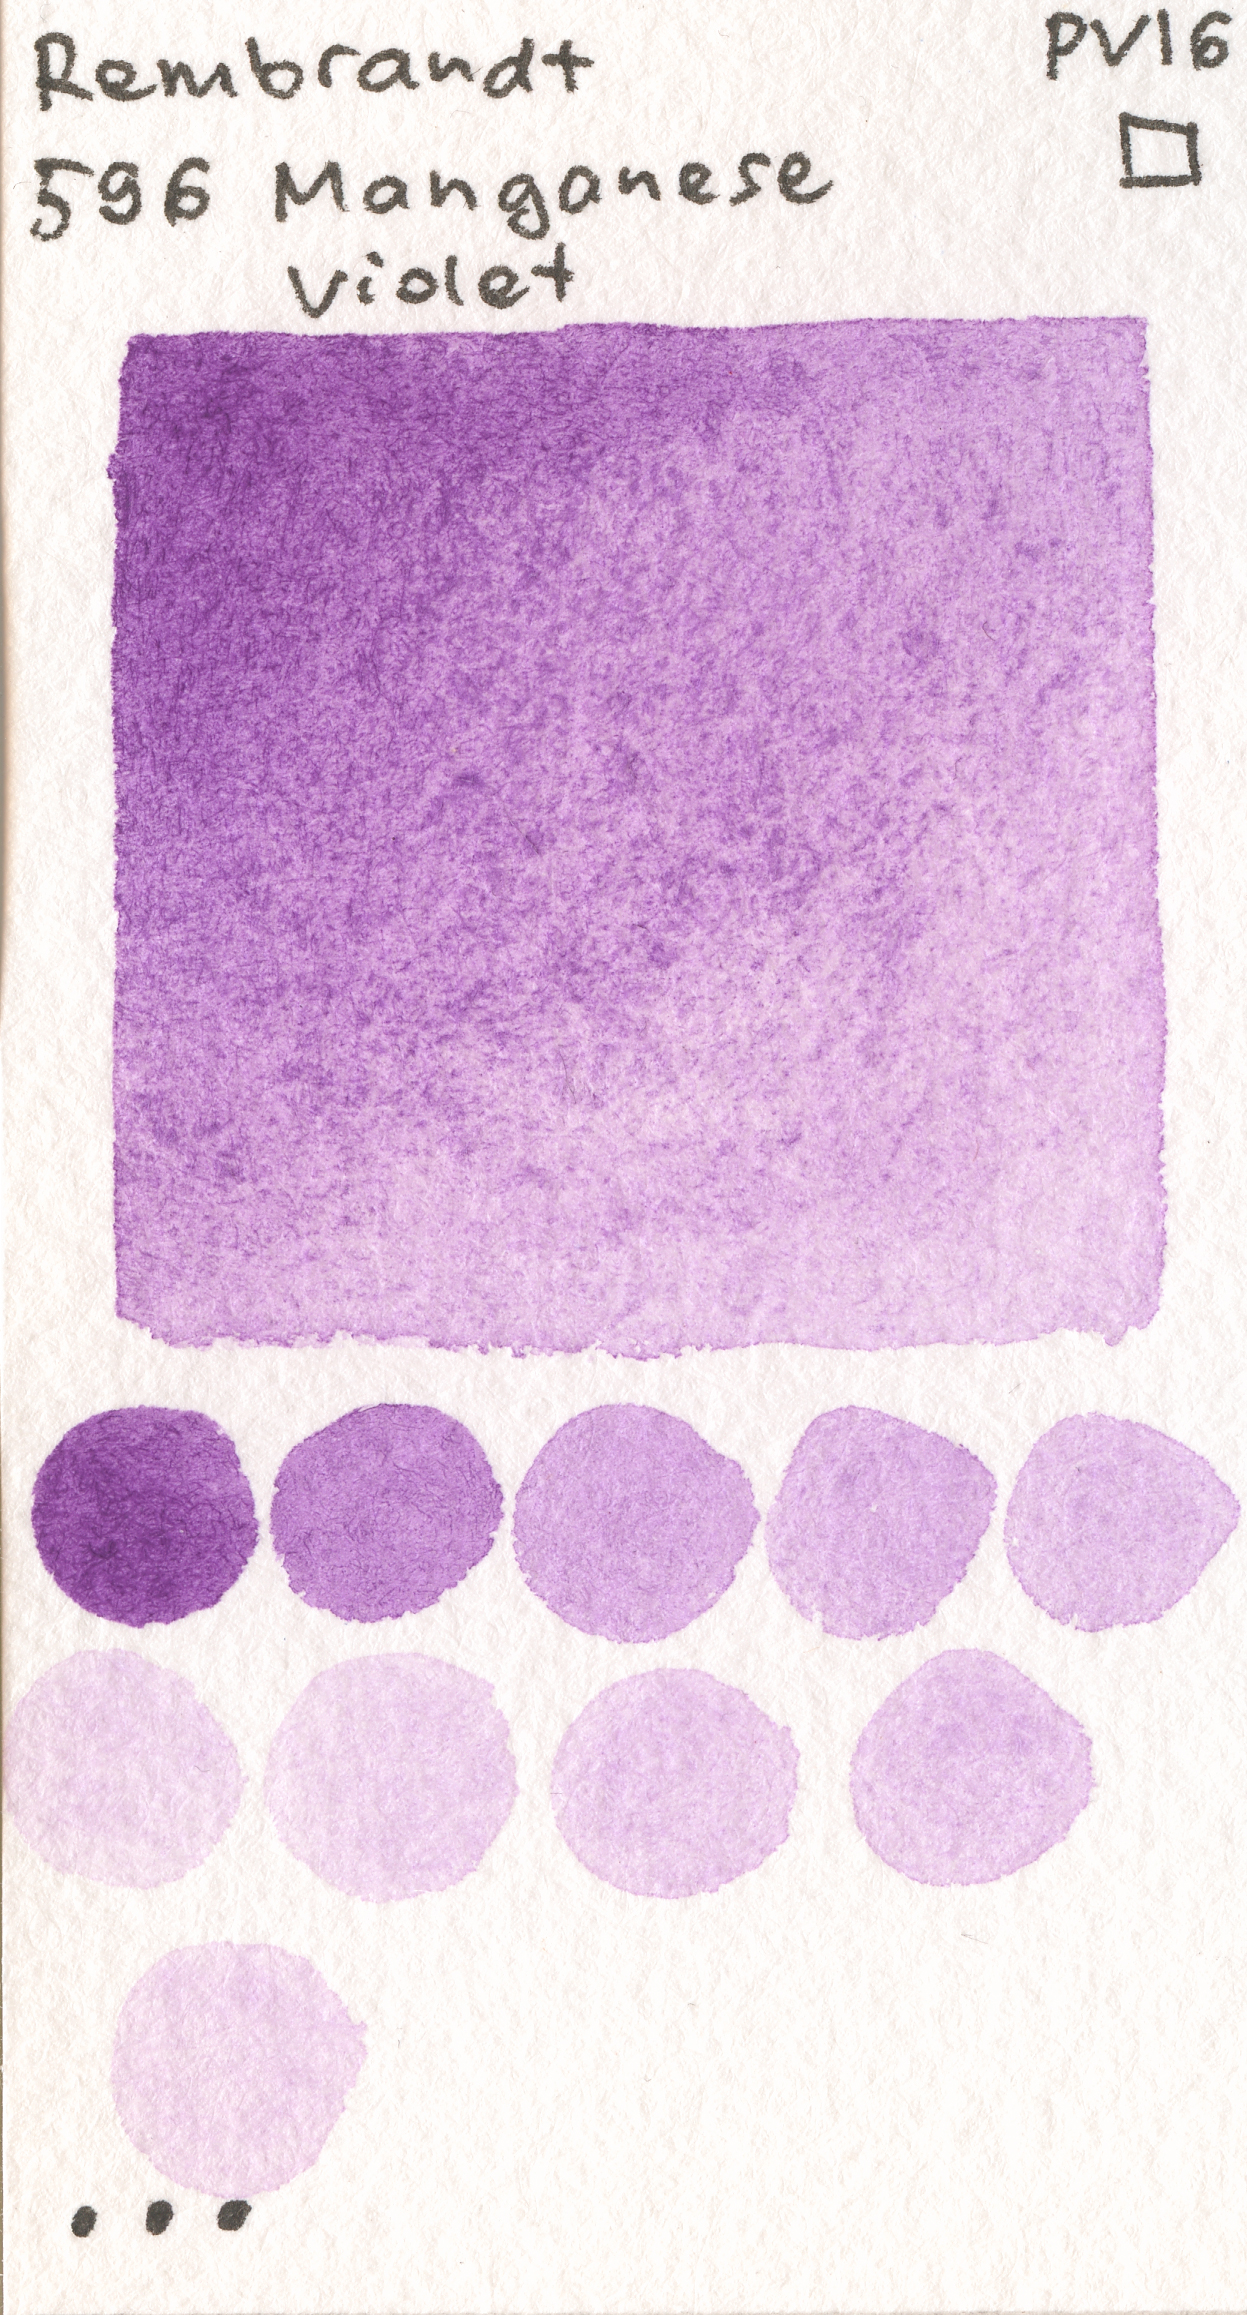 Royal Talens Rembrandt Water Colour 596 Manganese Violet PV16 watercolor swatch